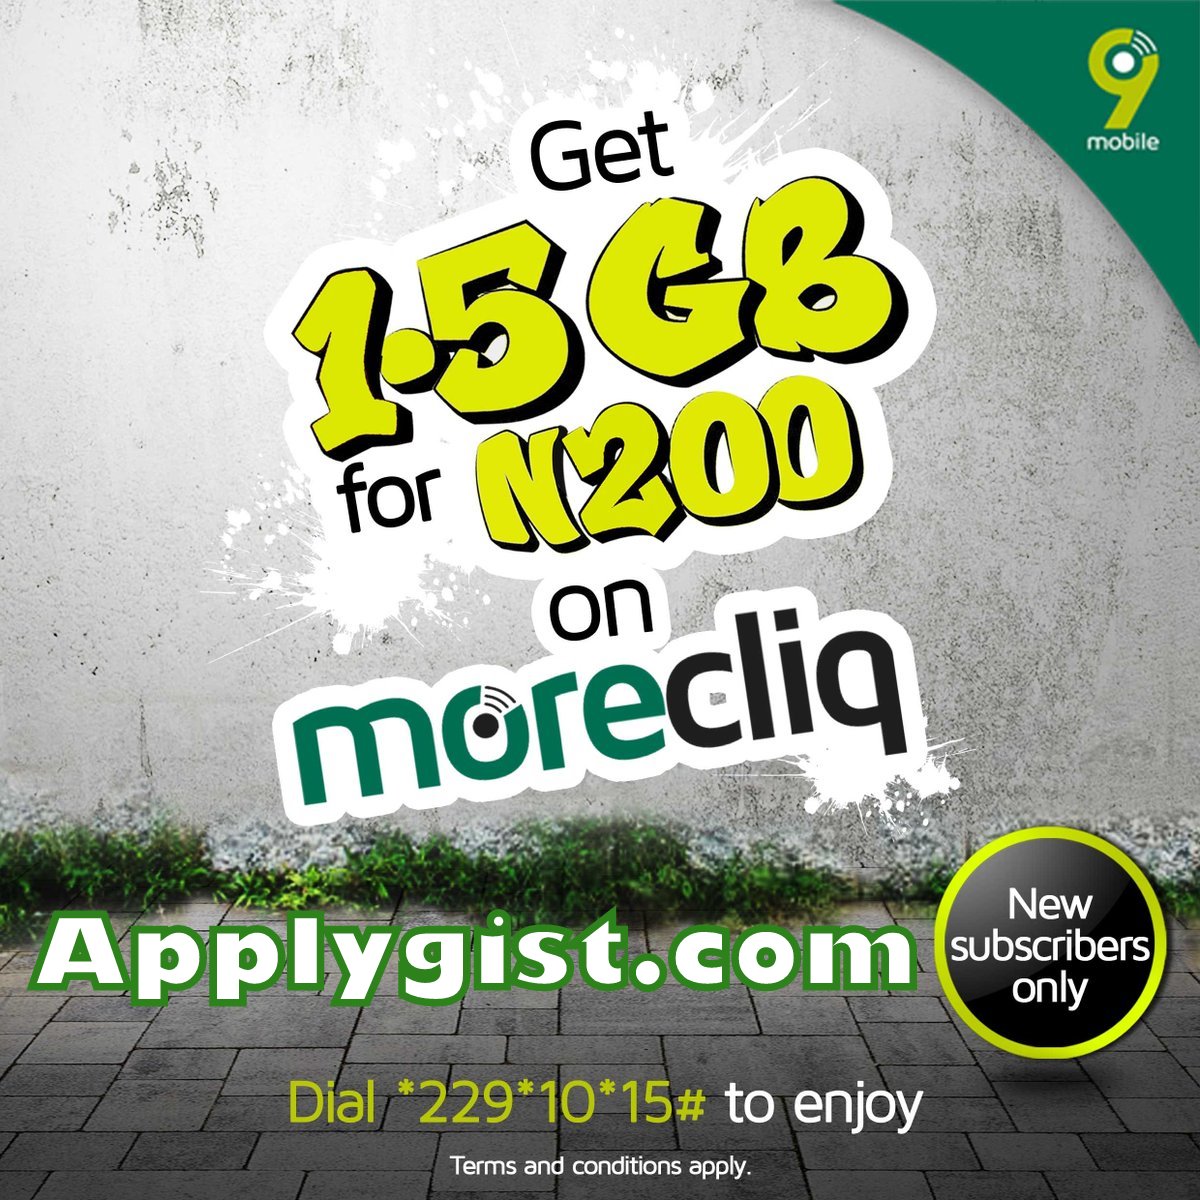 Get 9Mobile 1.5GB data for N200